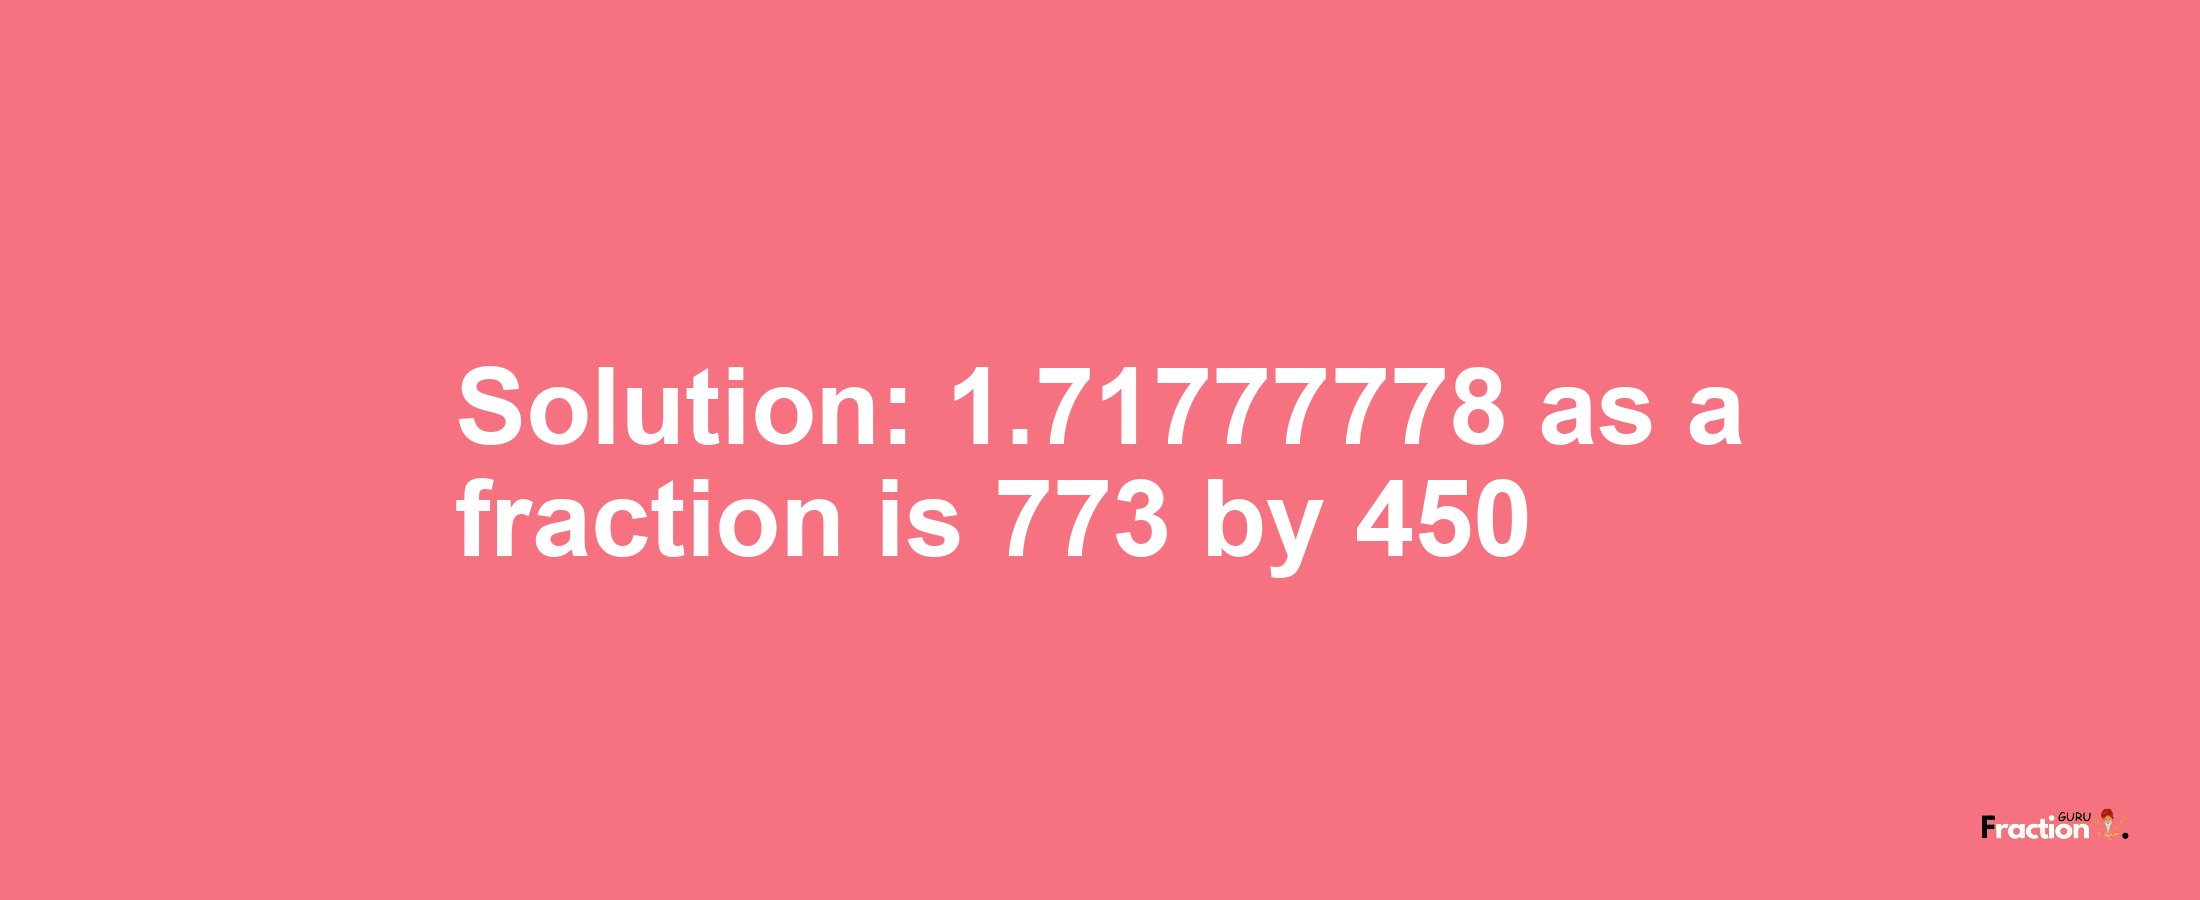 Solution:1.71777778 as a fraction is 773/450